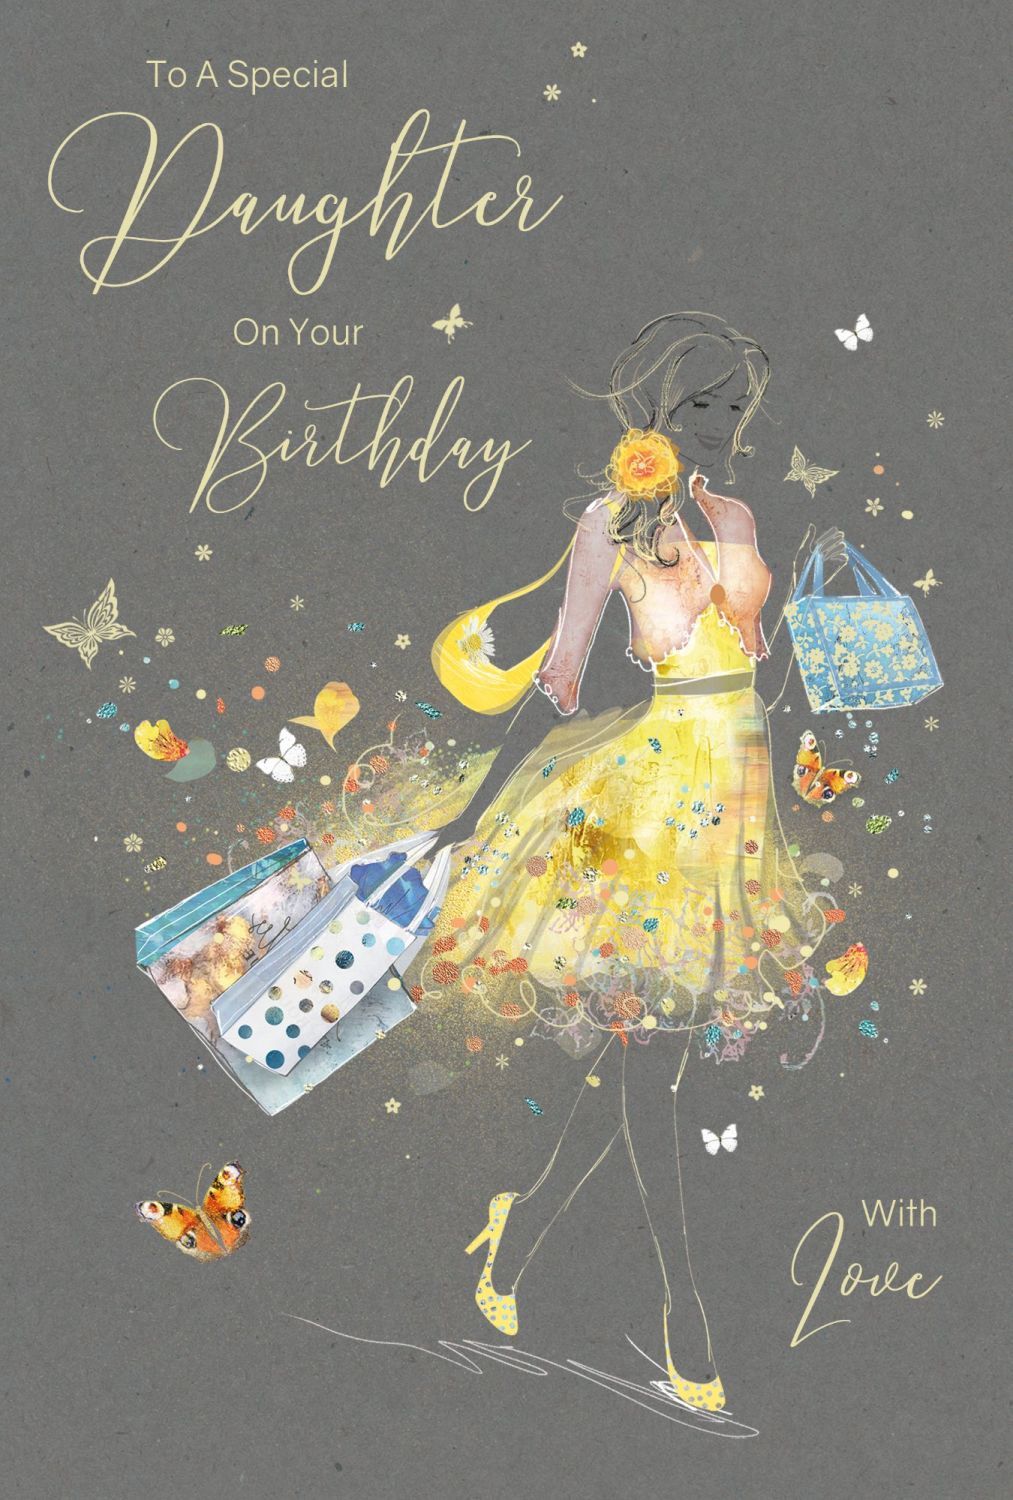 Special Daughter Birthday Card - ON Your BIRTHDAY With LOVE - SPARKLY Birth